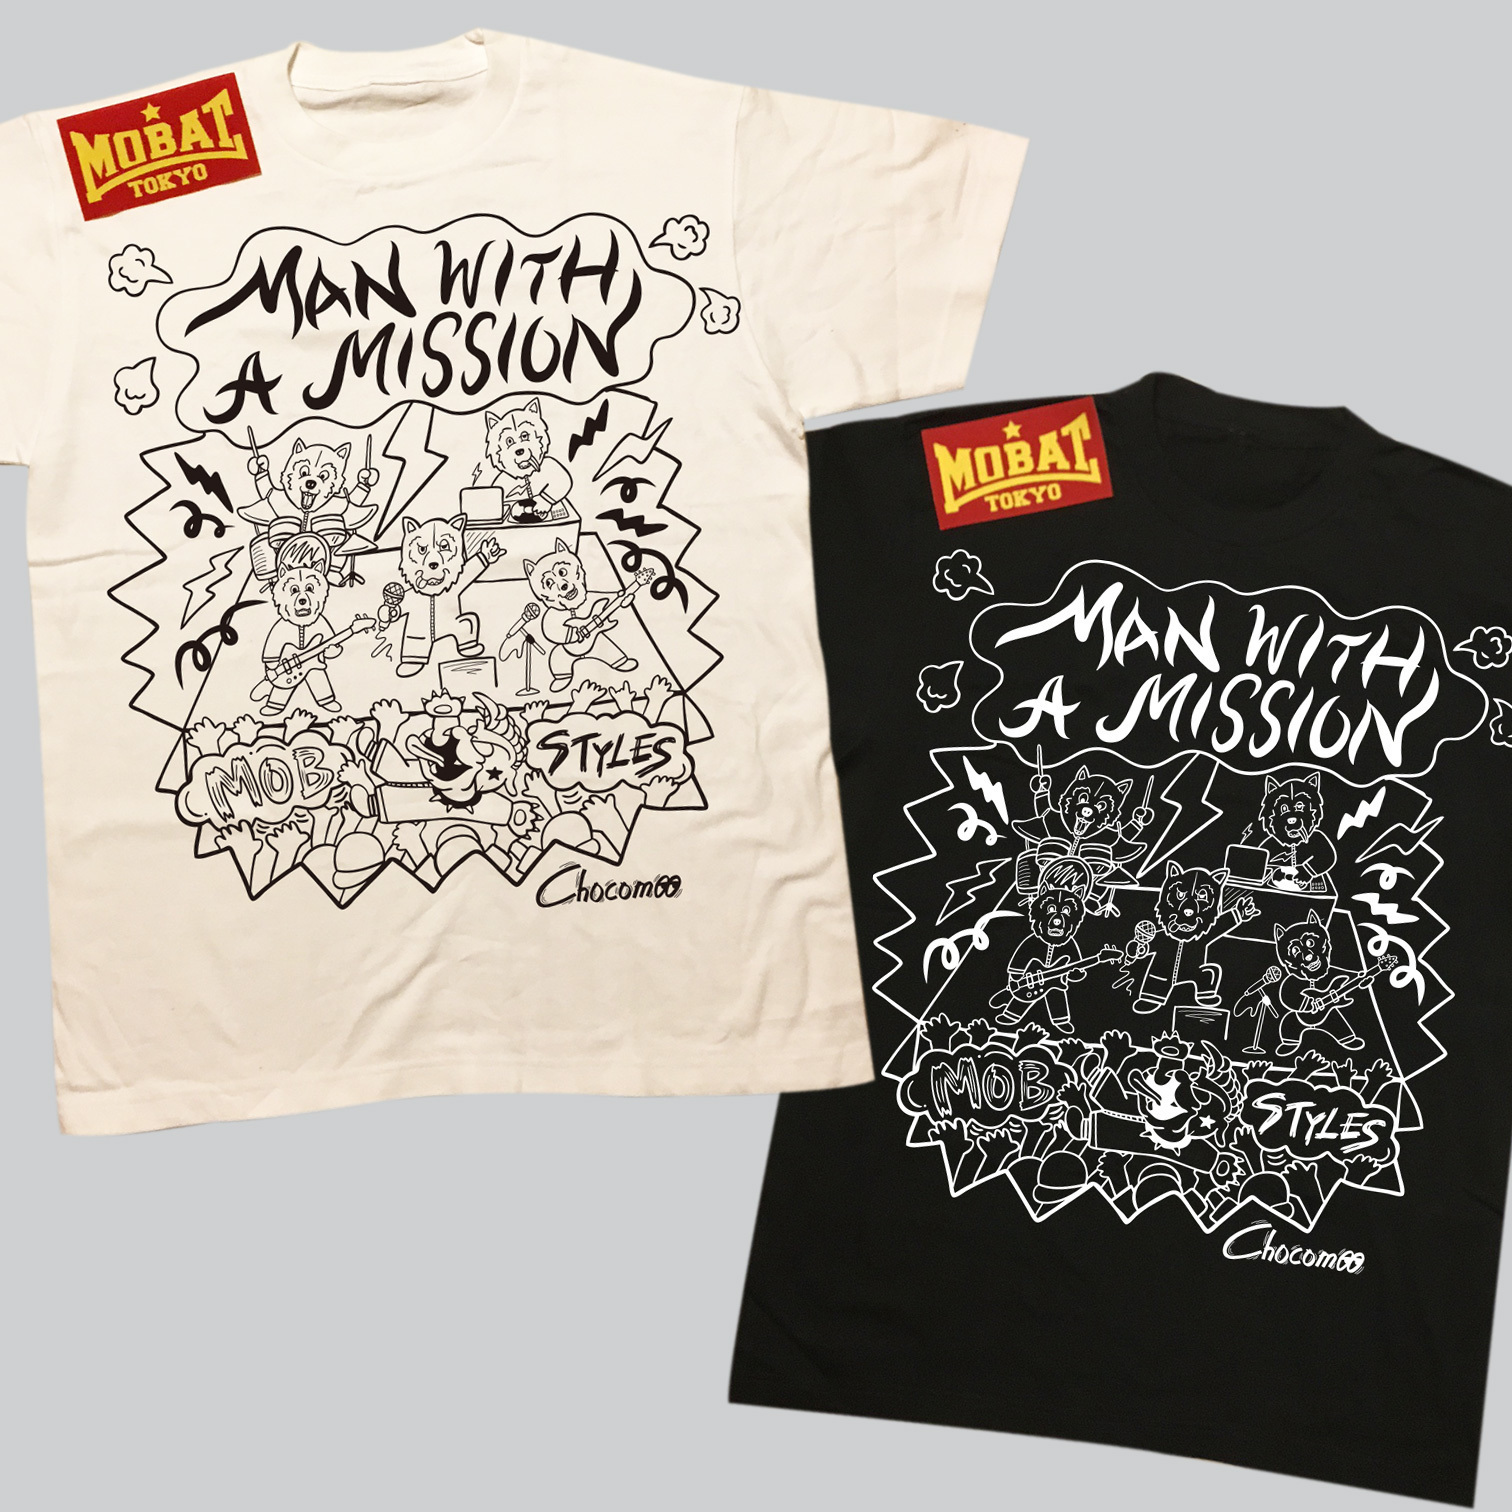 MAN WITH A MISSON x MOBSTYLESコラボTシャツ第三弾！ | MAN WITH A 